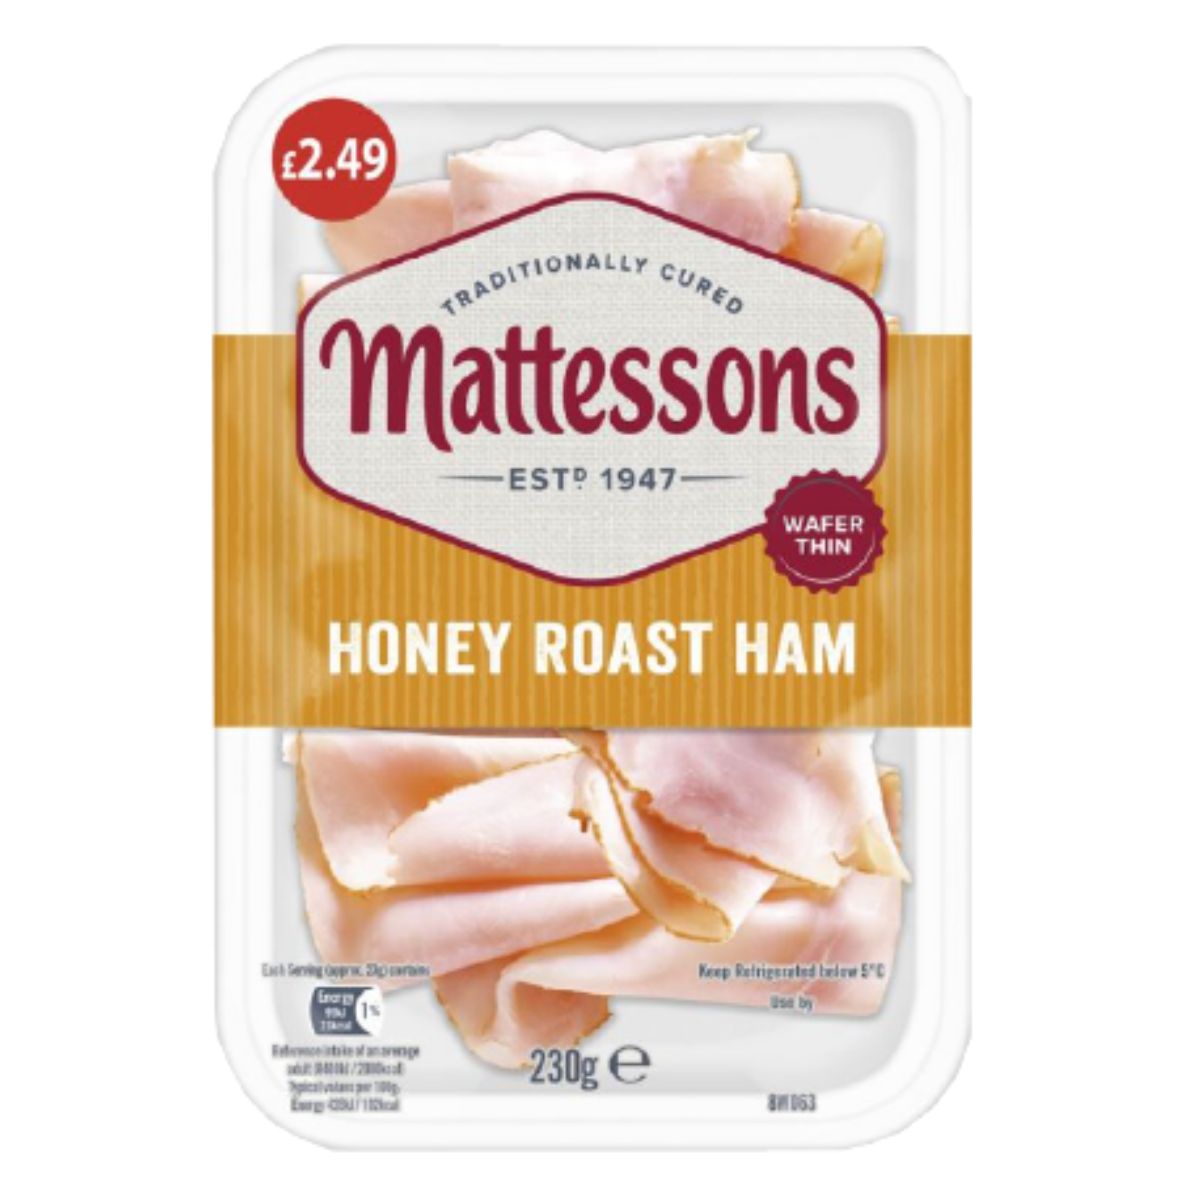 Packaged Mattessons - Wafer Thin Honey Roast Ham - 230g with a price label.